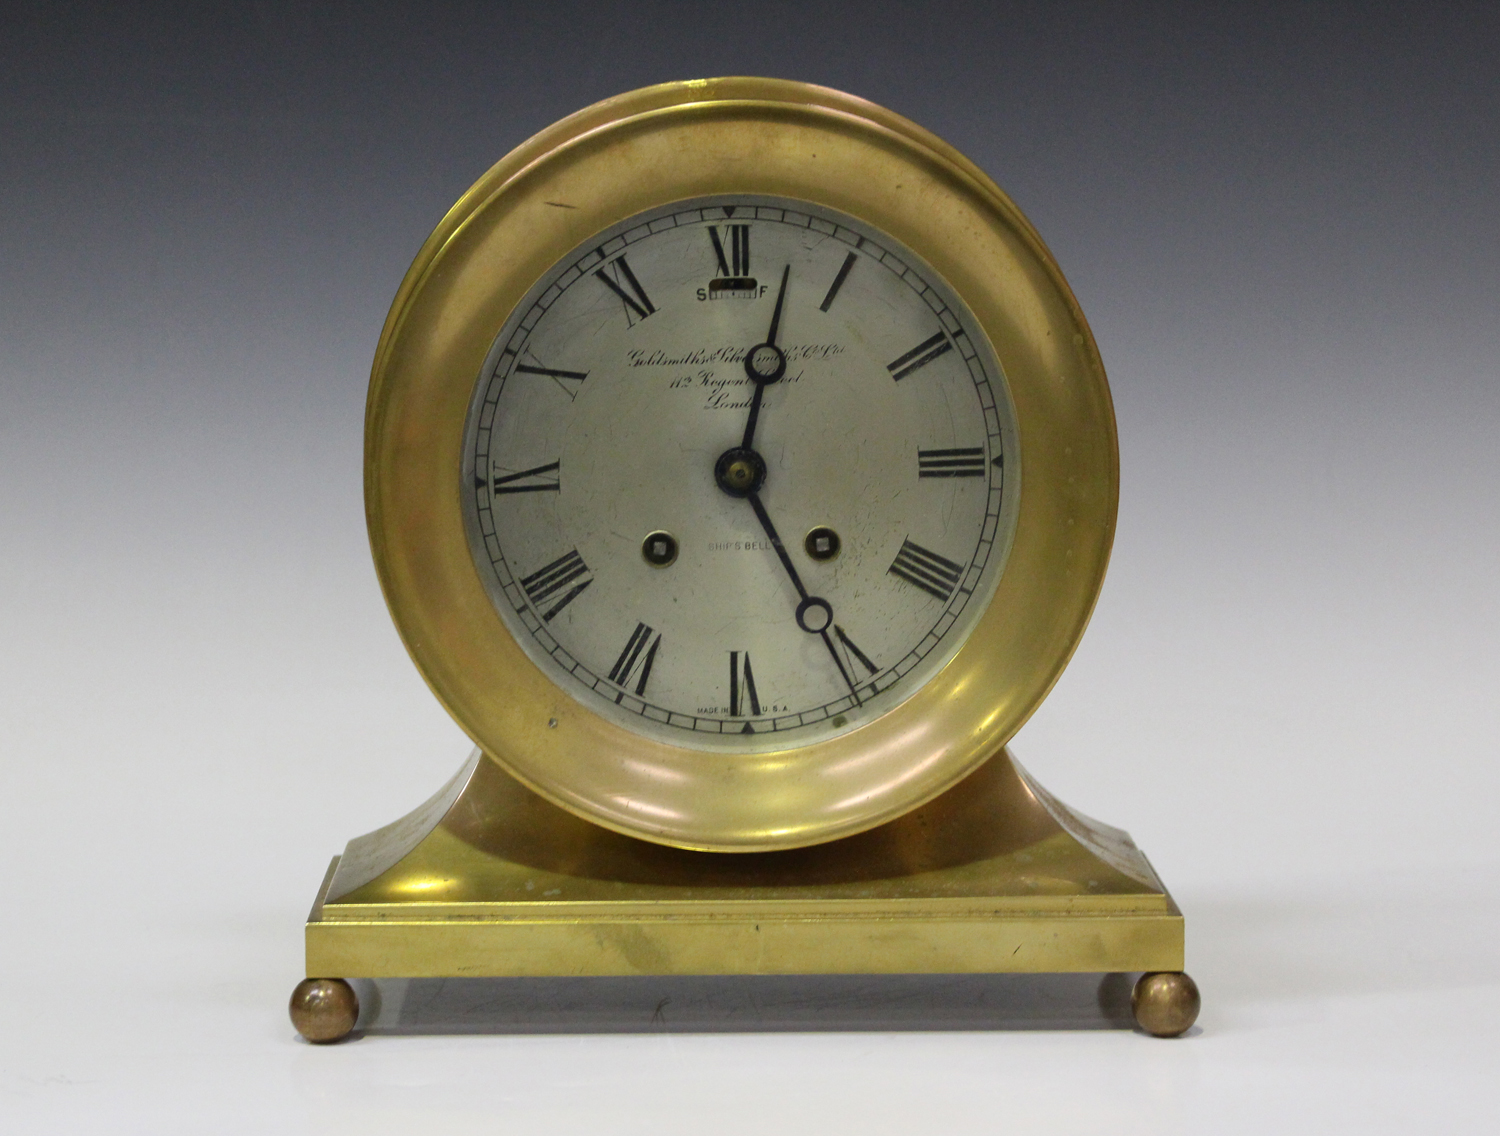 An early 20th century American bronze circular cased ship's clock mantel timepiece by Chelsea